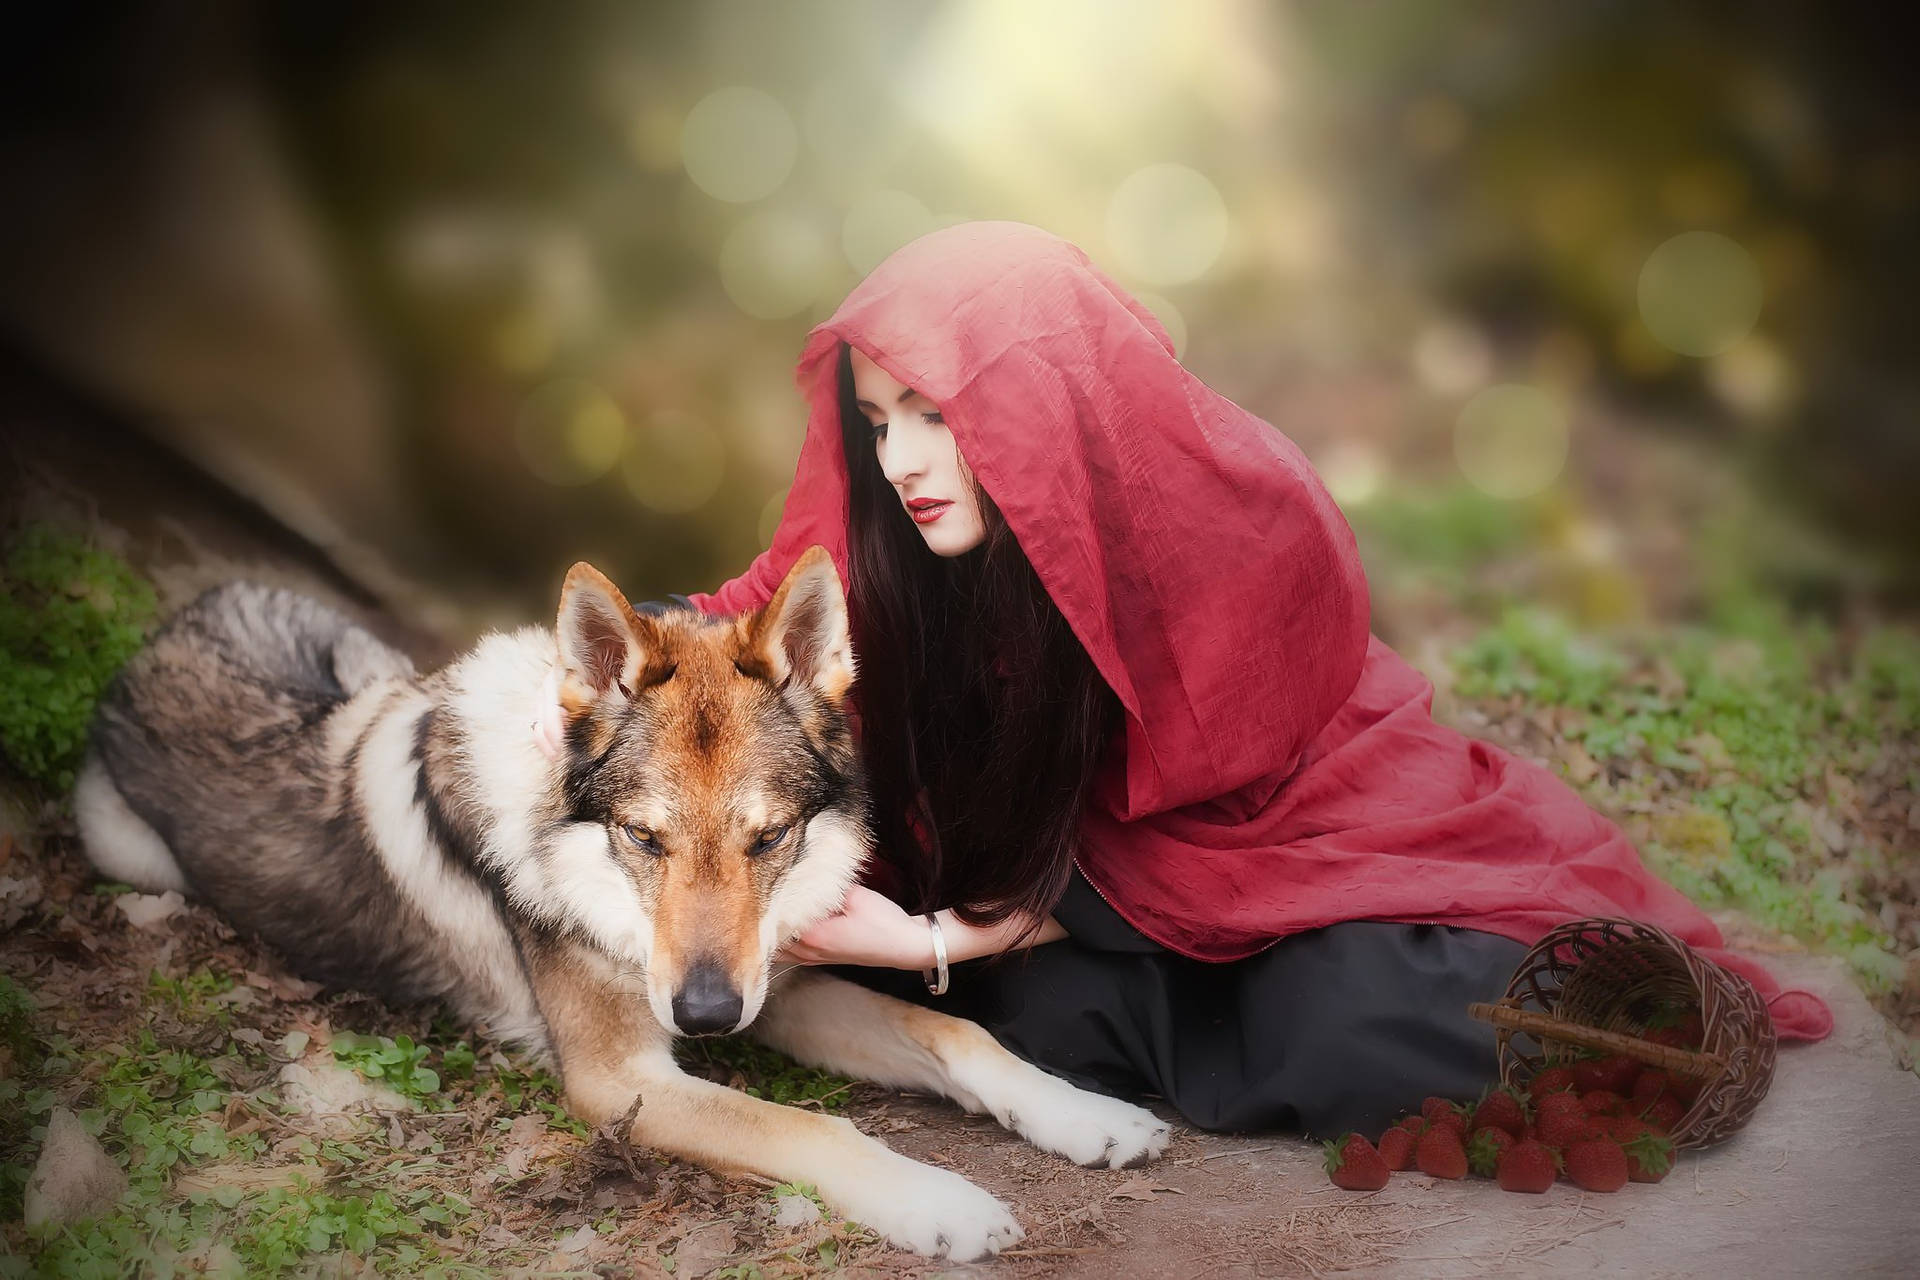 Little Red Riding Hood bonding with loyal canine companion Wallpaper